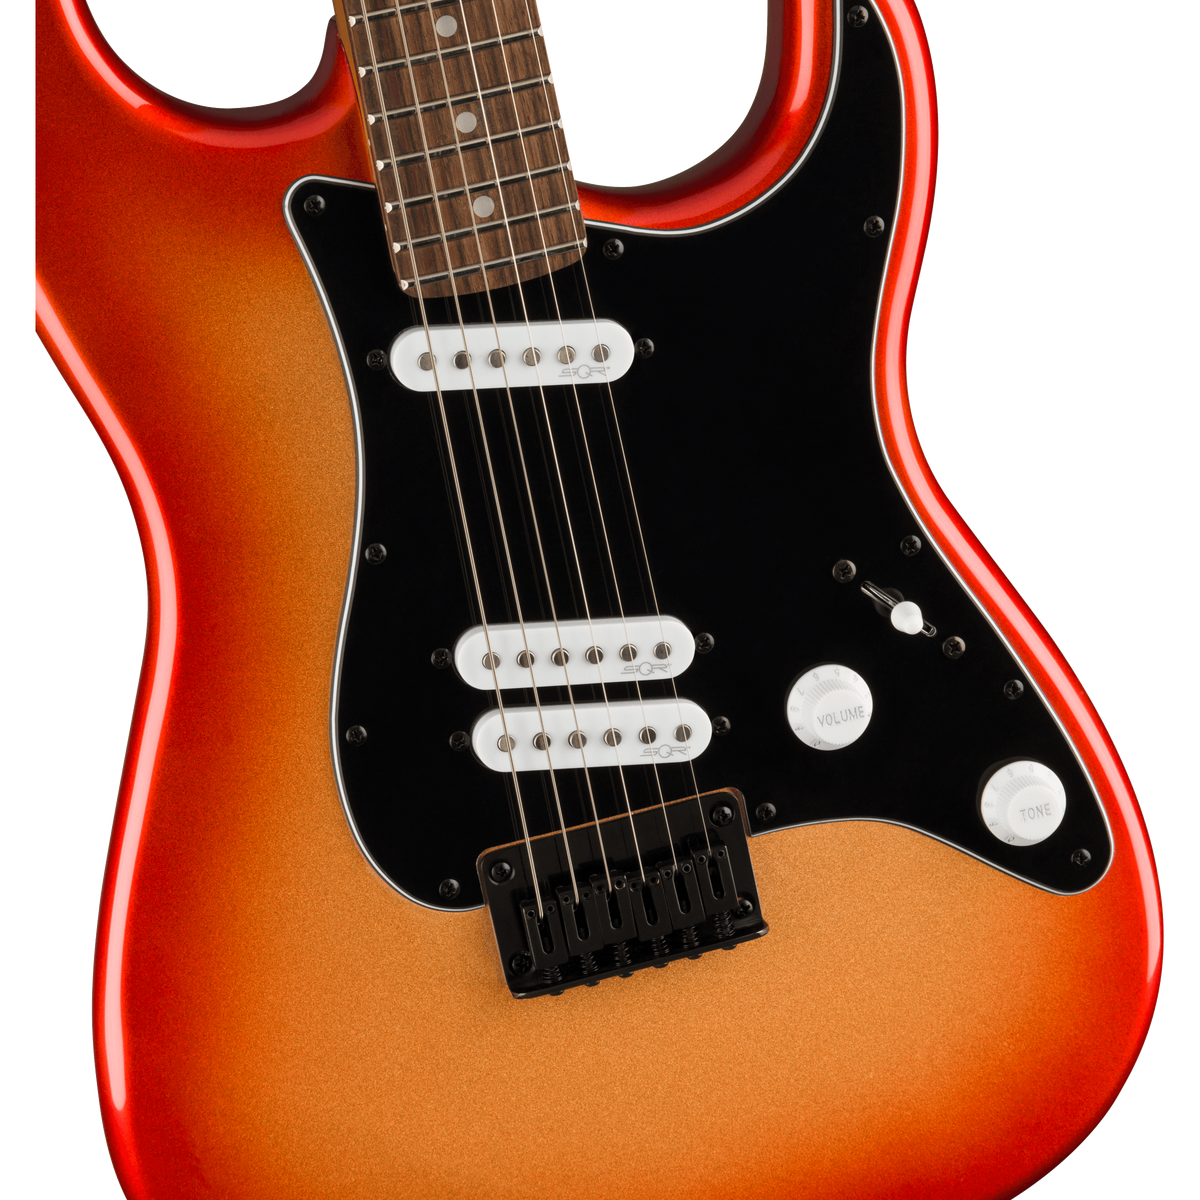 Fender Squier Contemporary Stratocaster Special HT Electric Guitar Sunset Metallic